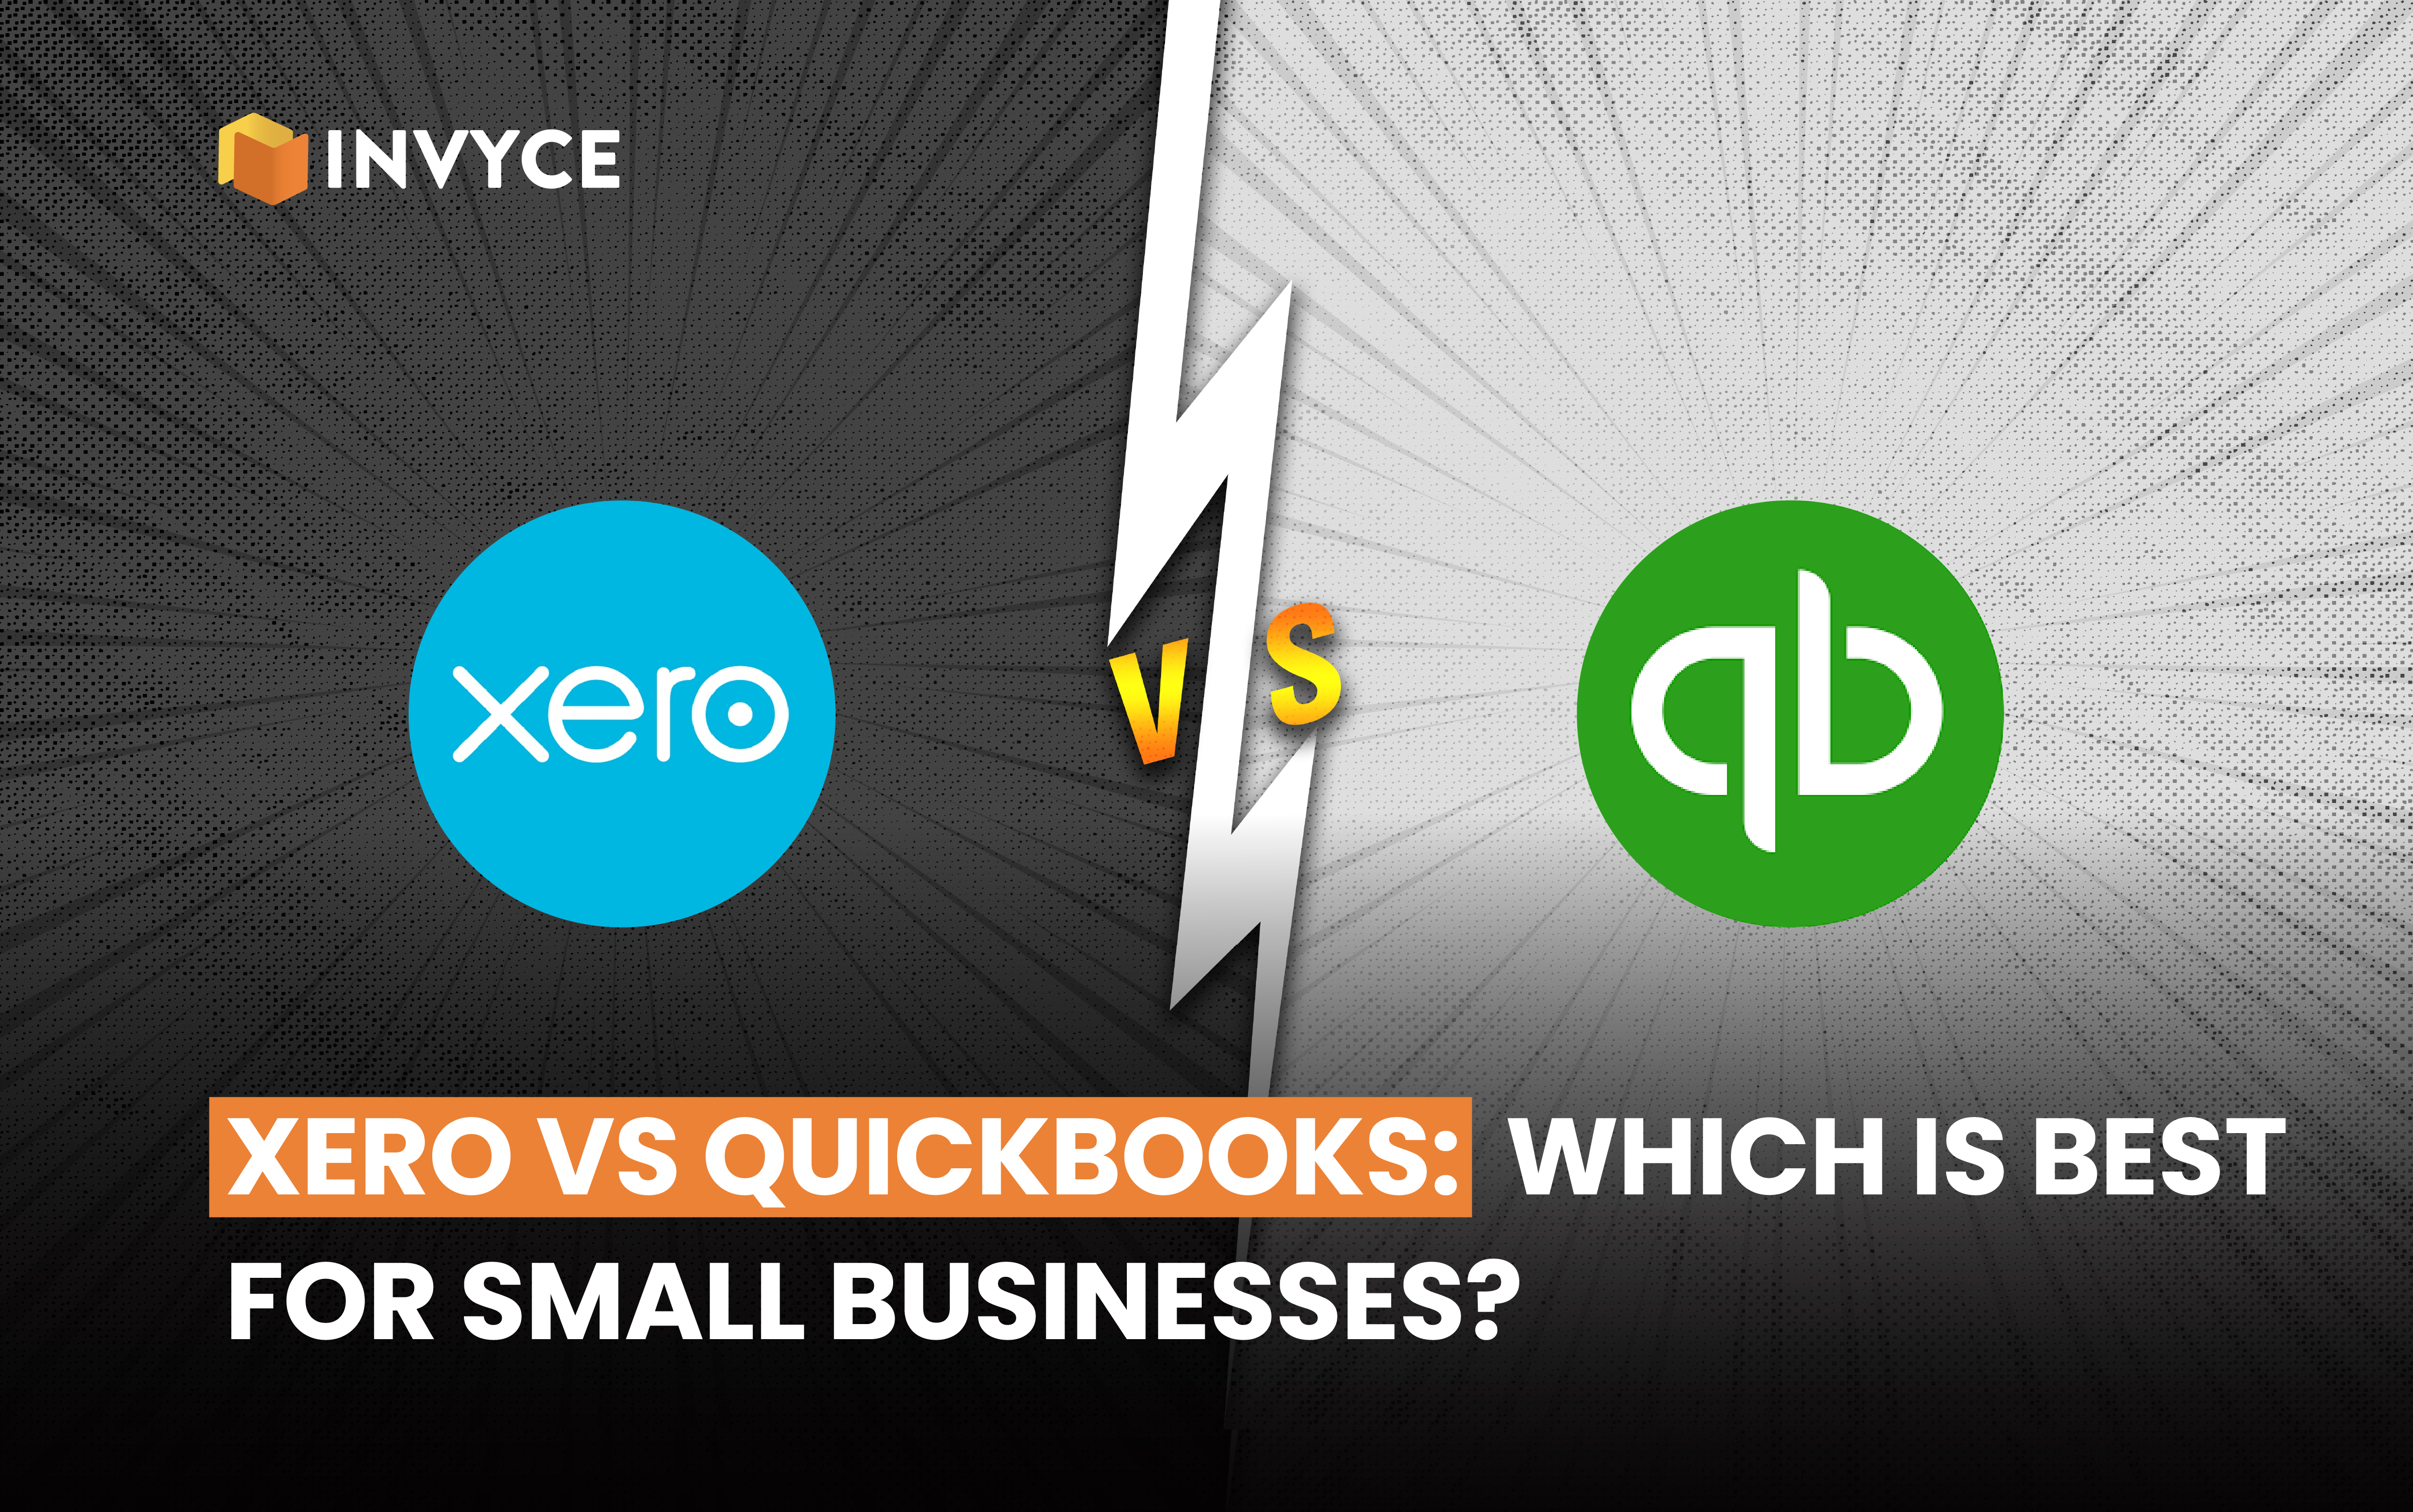 Xero vs. QuickBooks: Which is Best for Small Businesses?